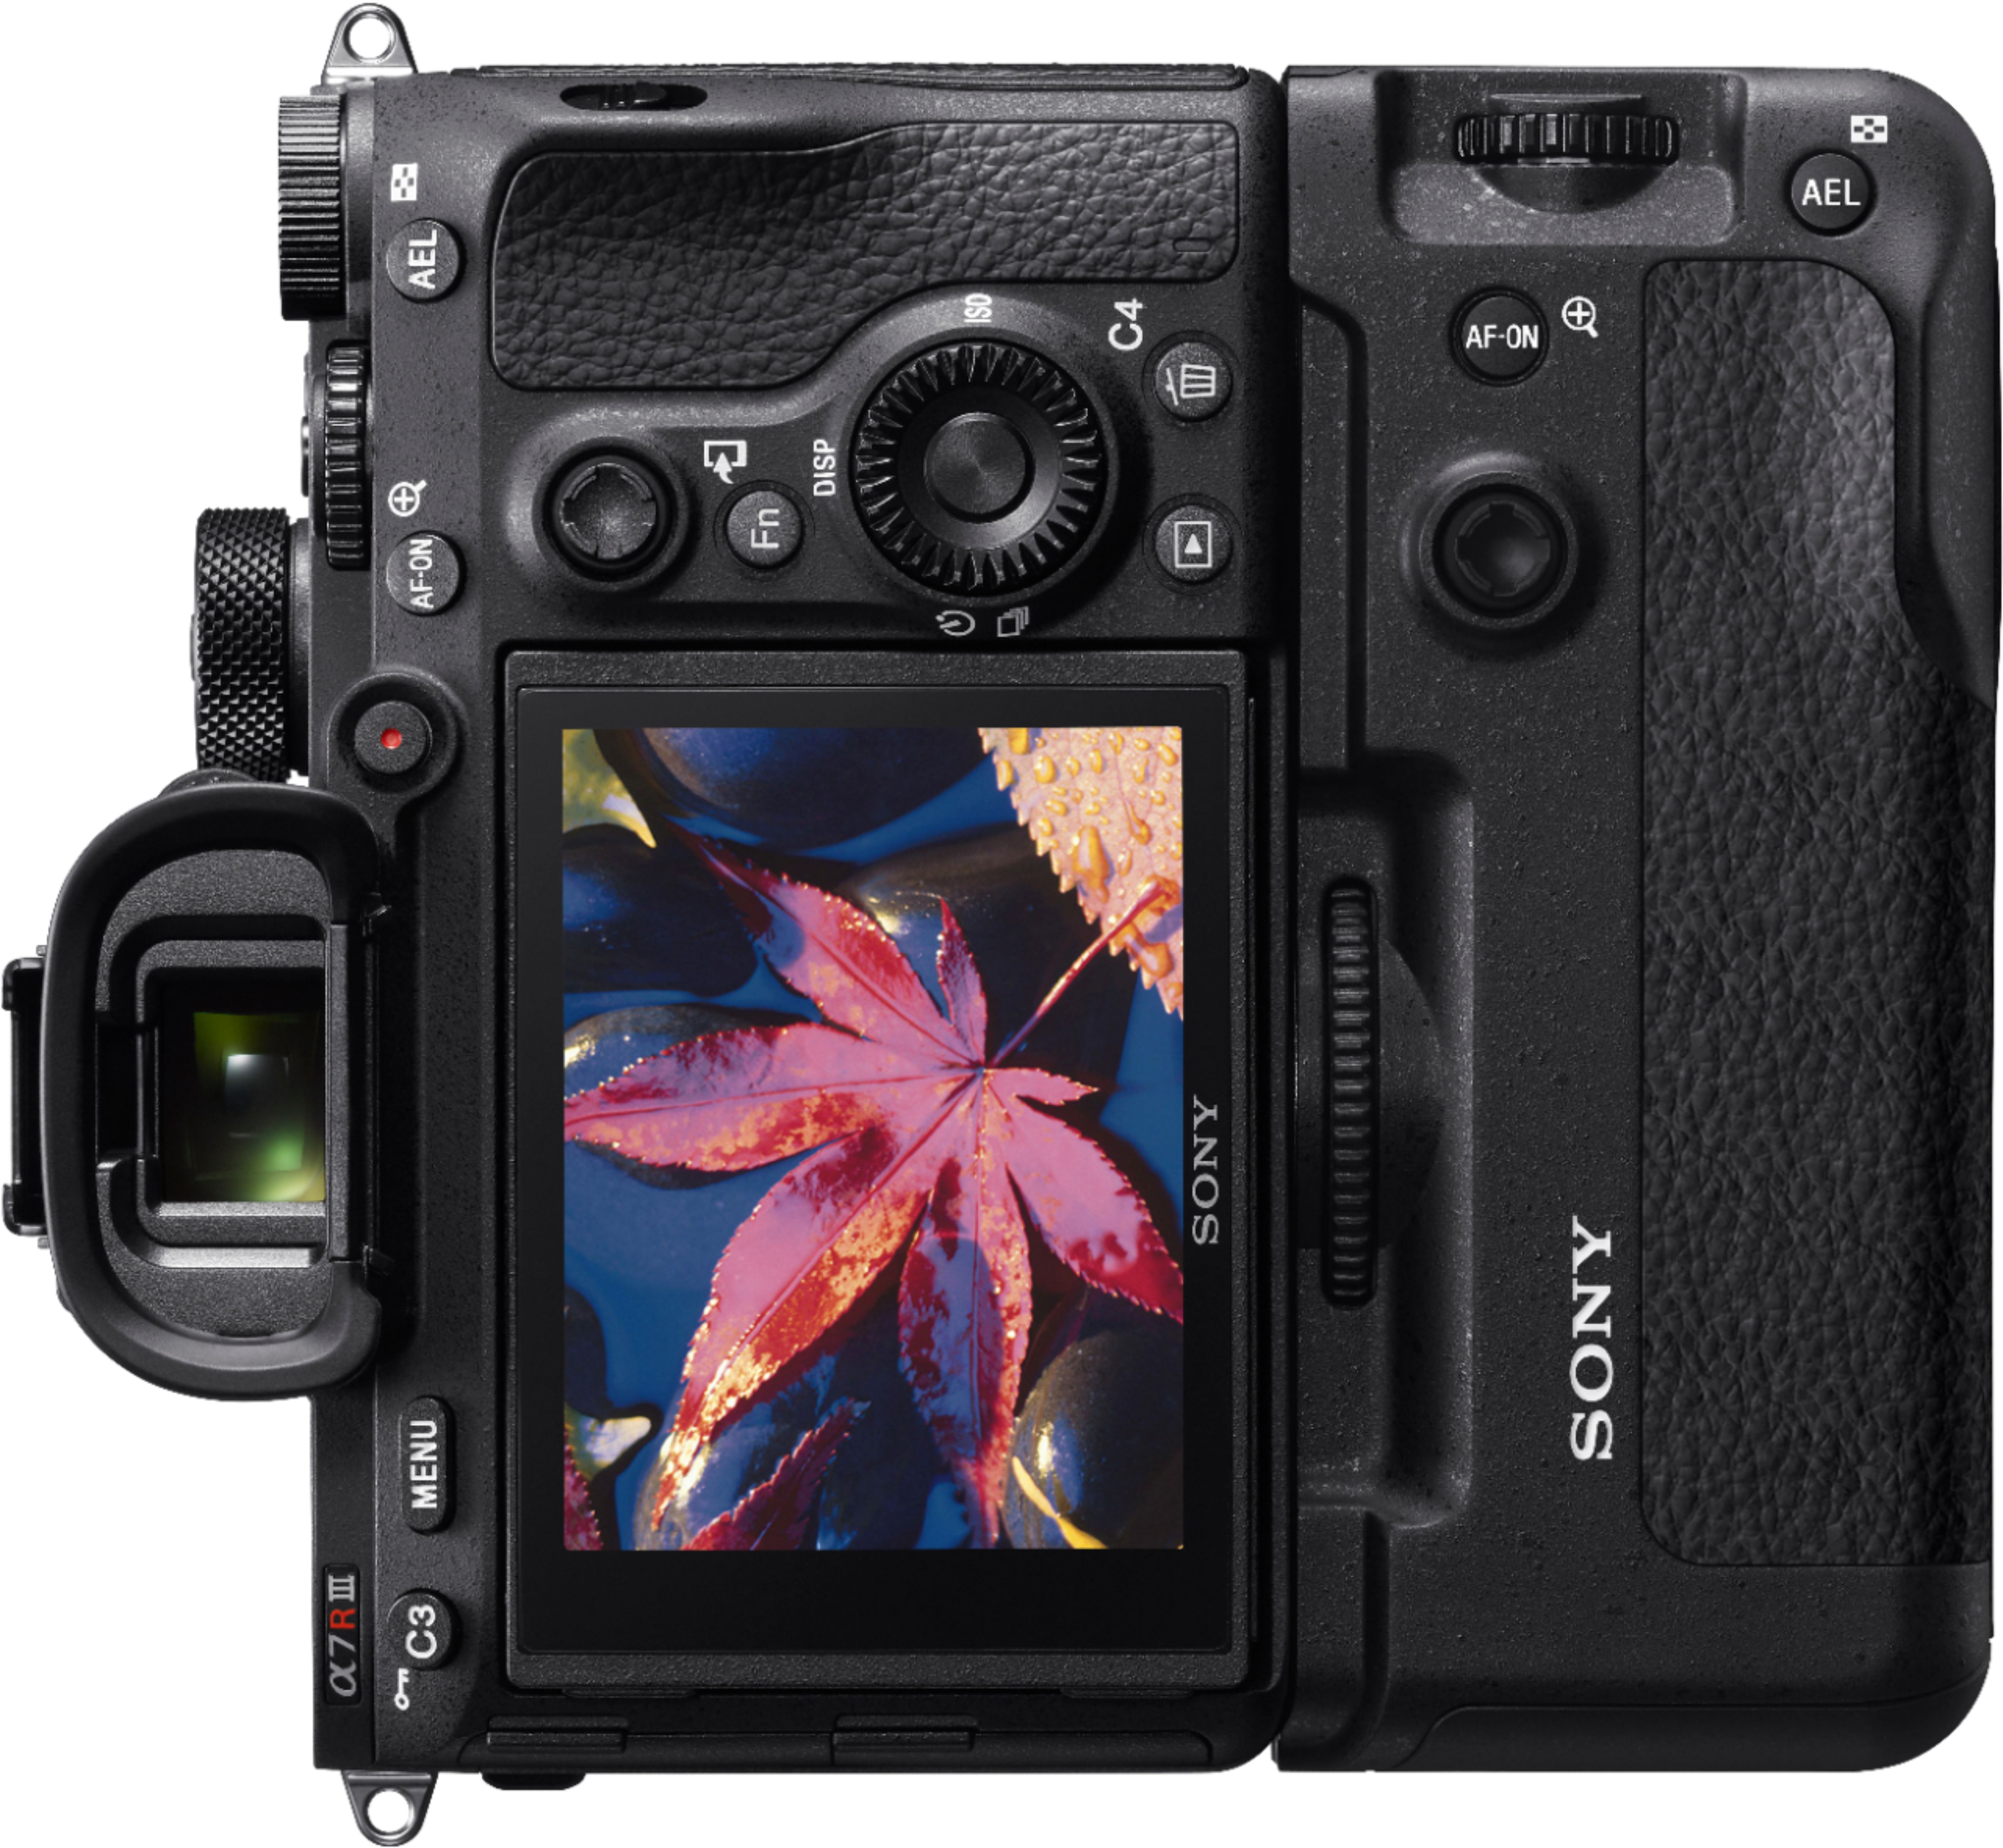 Sony A7 III camera - photo/video - by owner - electronics sale - craigslist